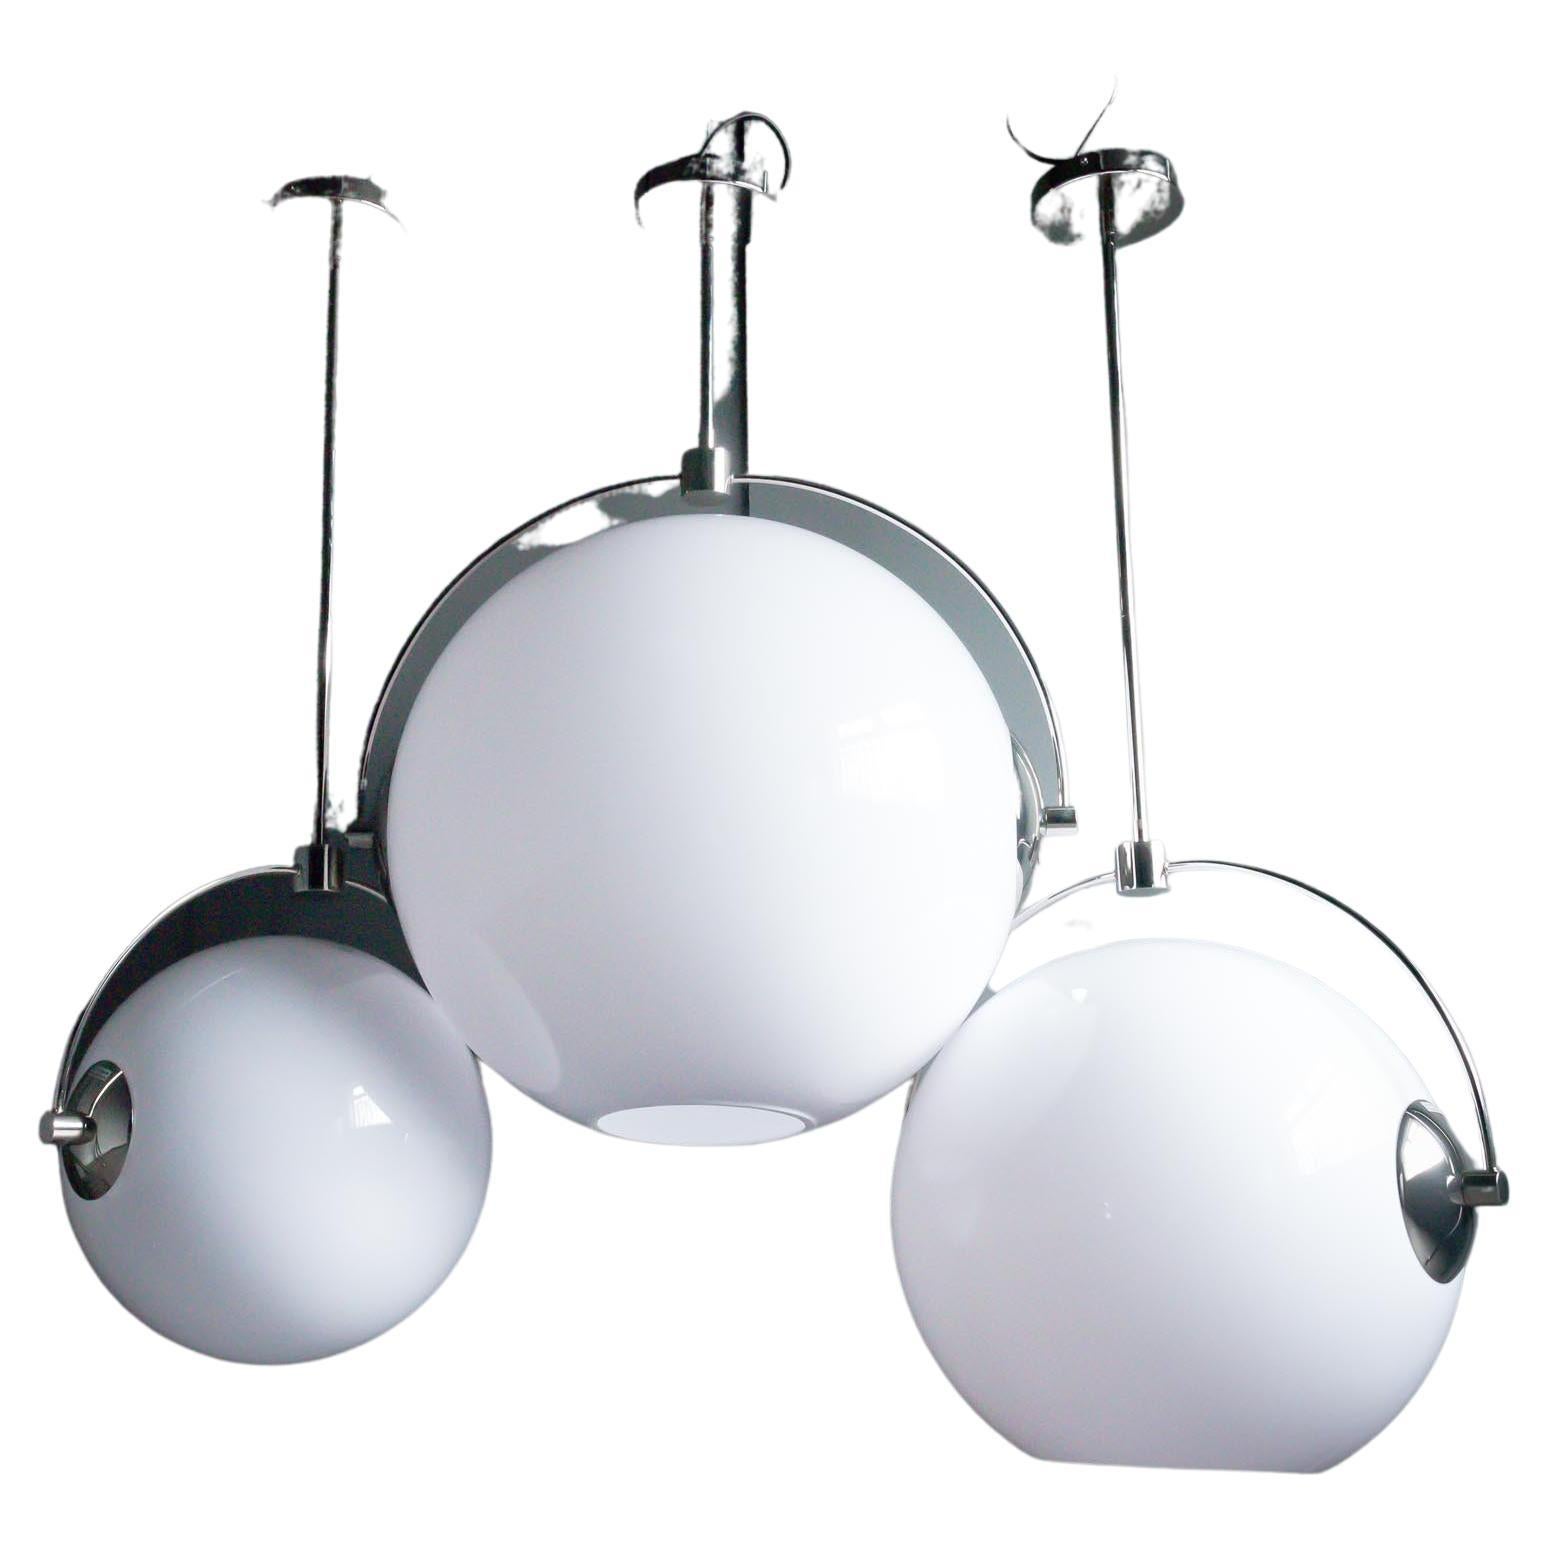 Trio of Mid Century Influenced Globe Ceiling Pendant Lights For Sale